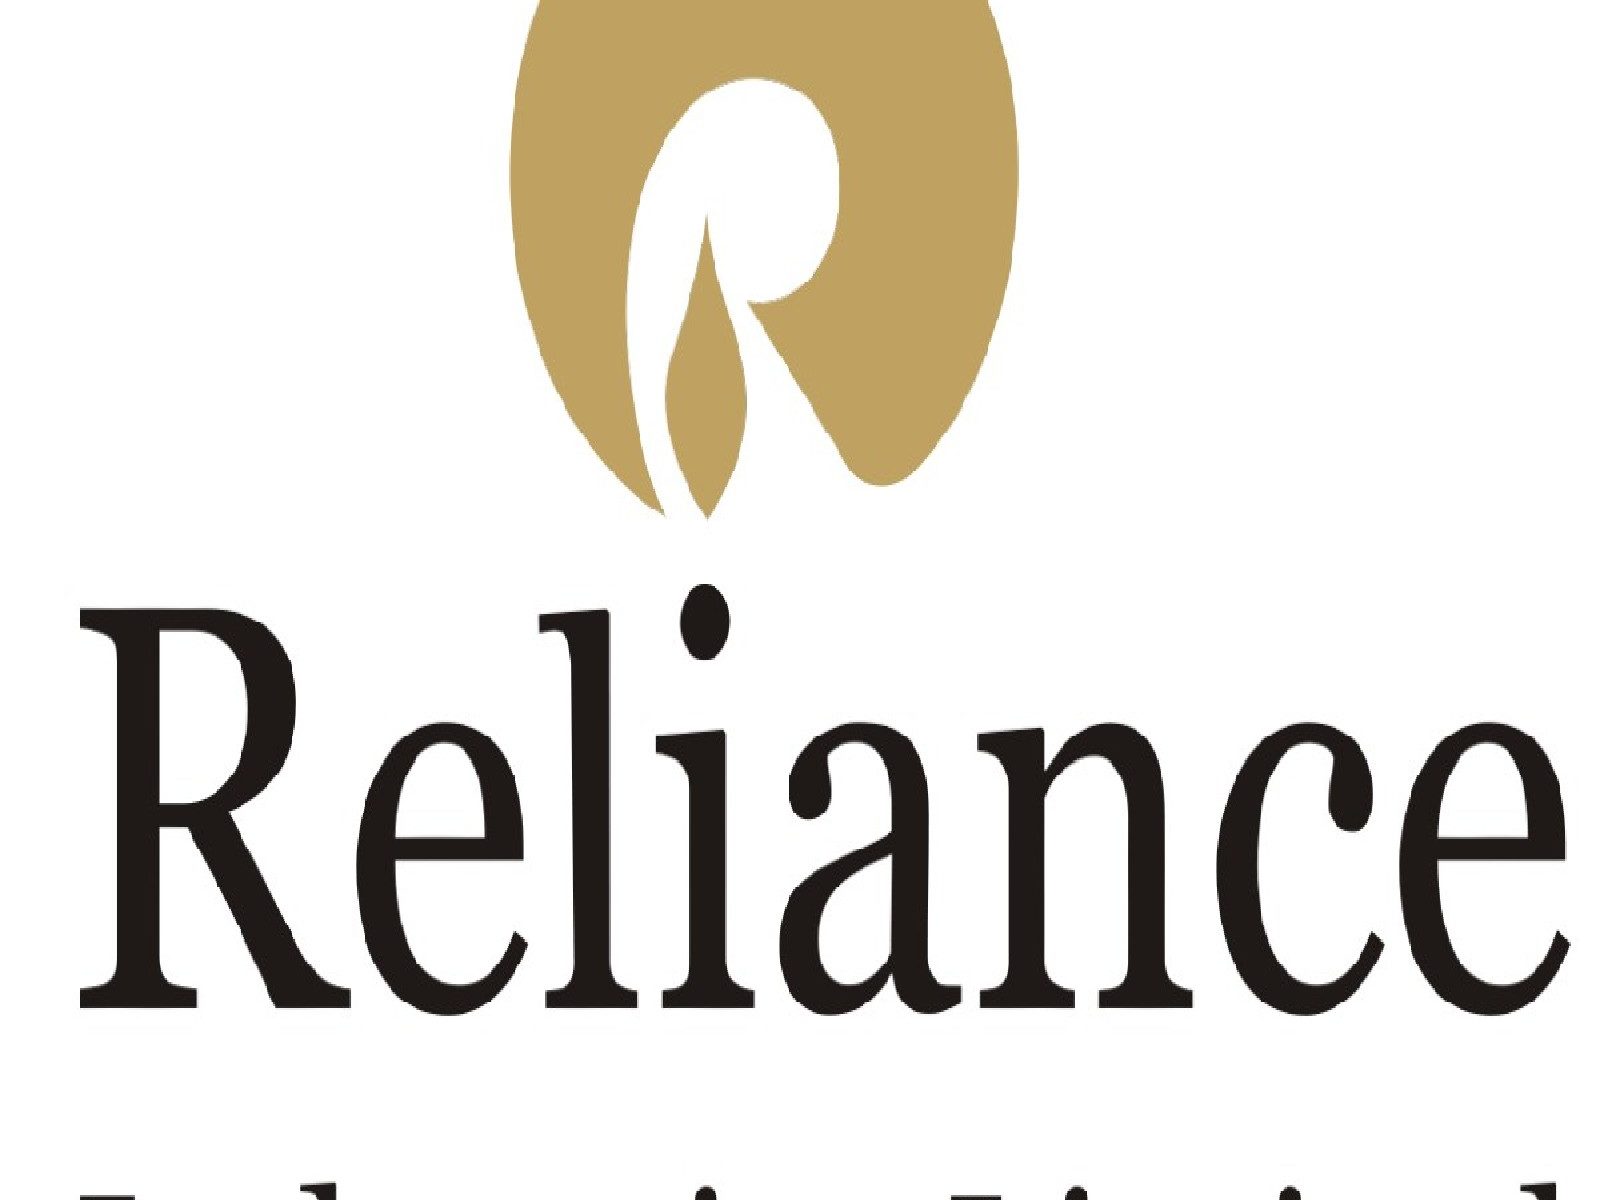 Reliance group is hiring for various roles, check details